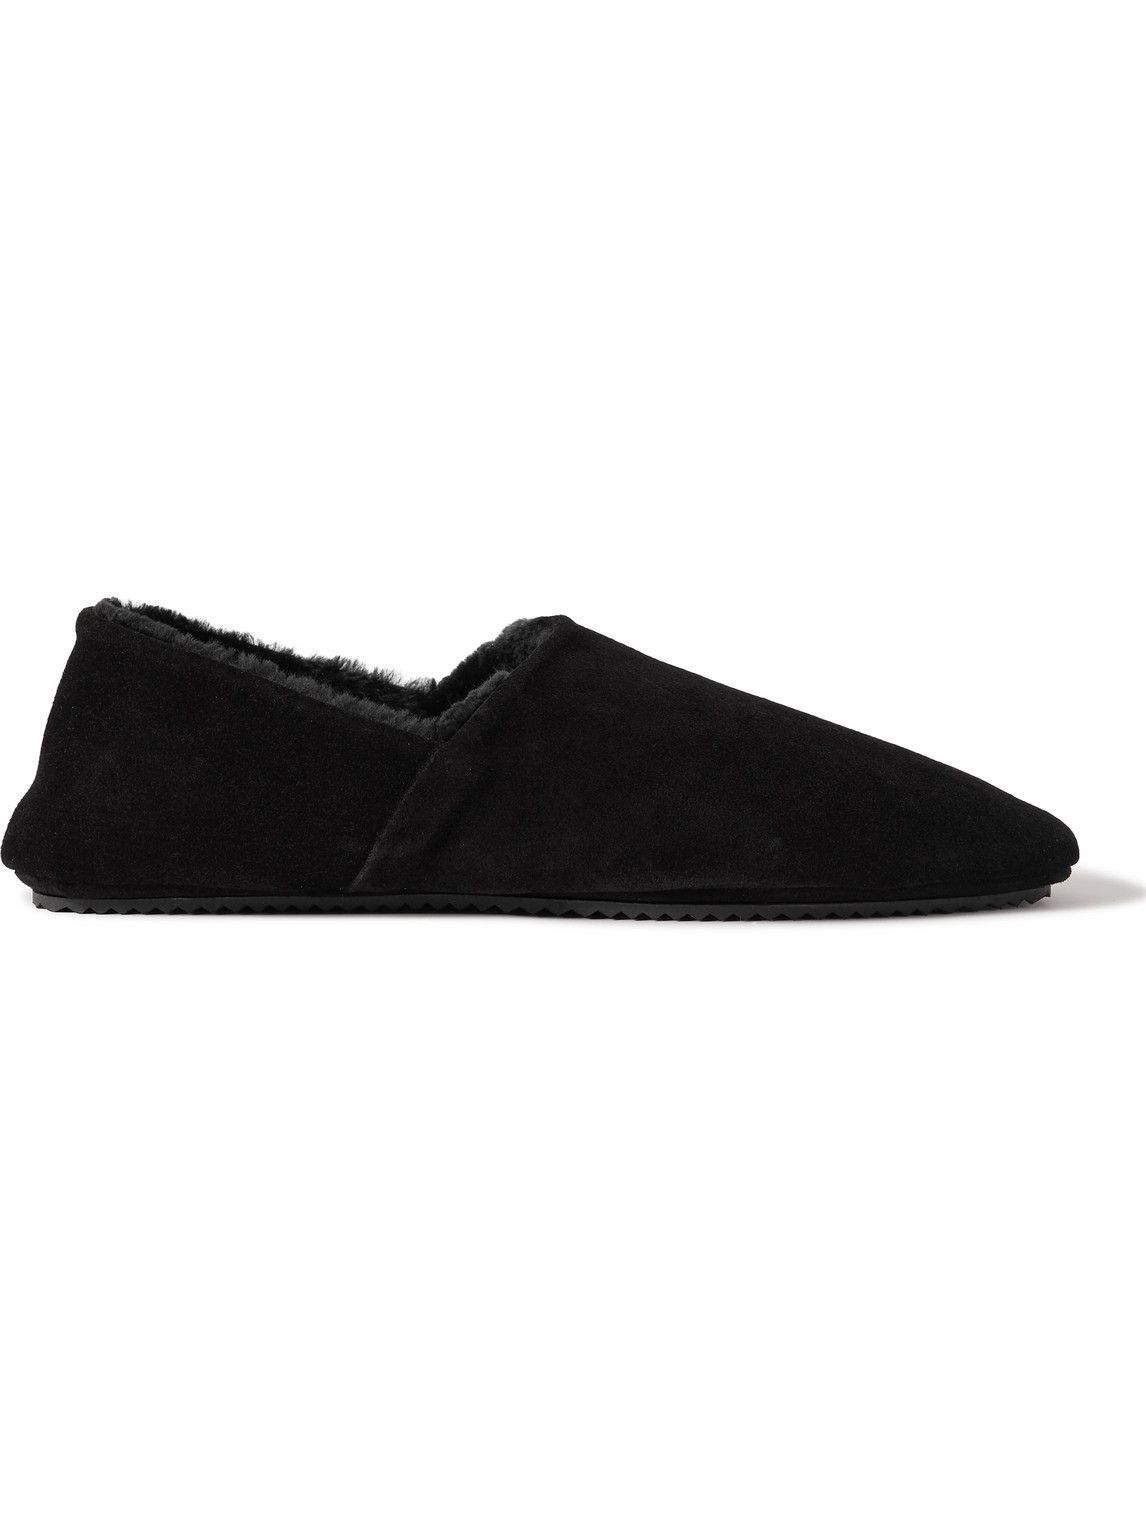 Mr P. - Collapsible-Heel Shearling-Lined Suede Slippers - Black Mr P.